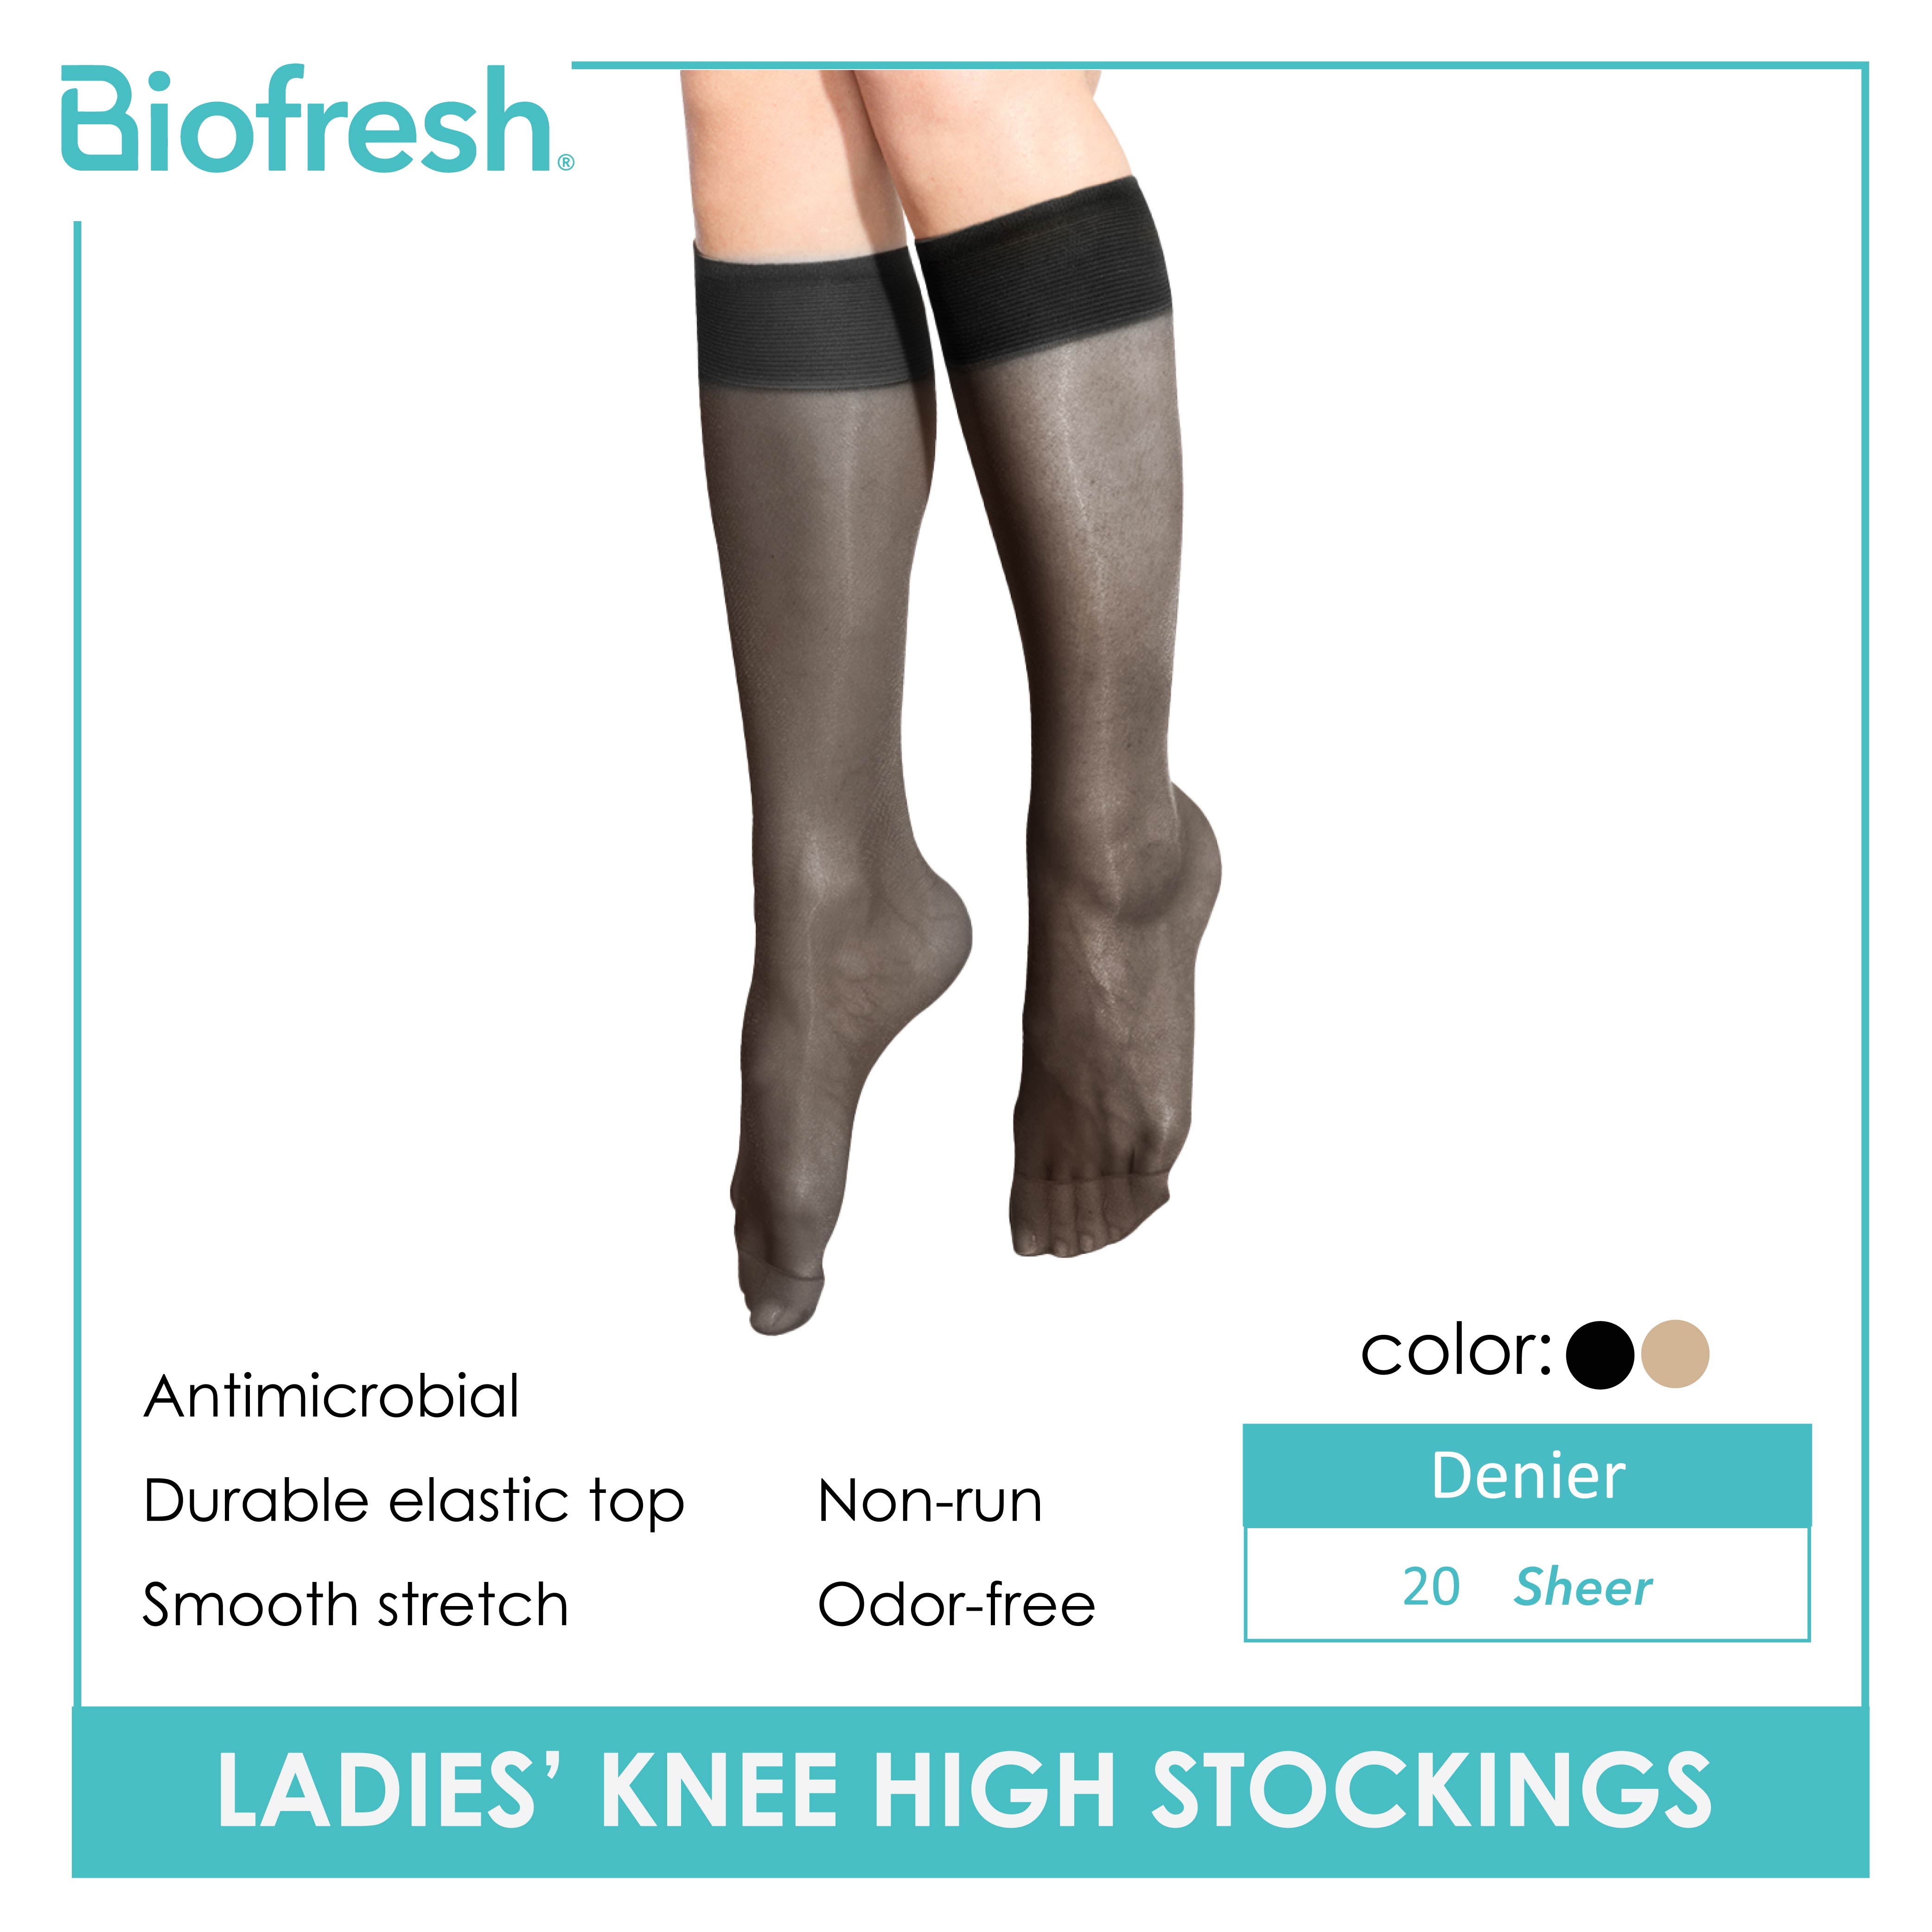 Biofresh Ladies' Antimicrobial Smooth Stretch Knee High Stockings 20 Denier  3 pairs in a pack RSKHG20